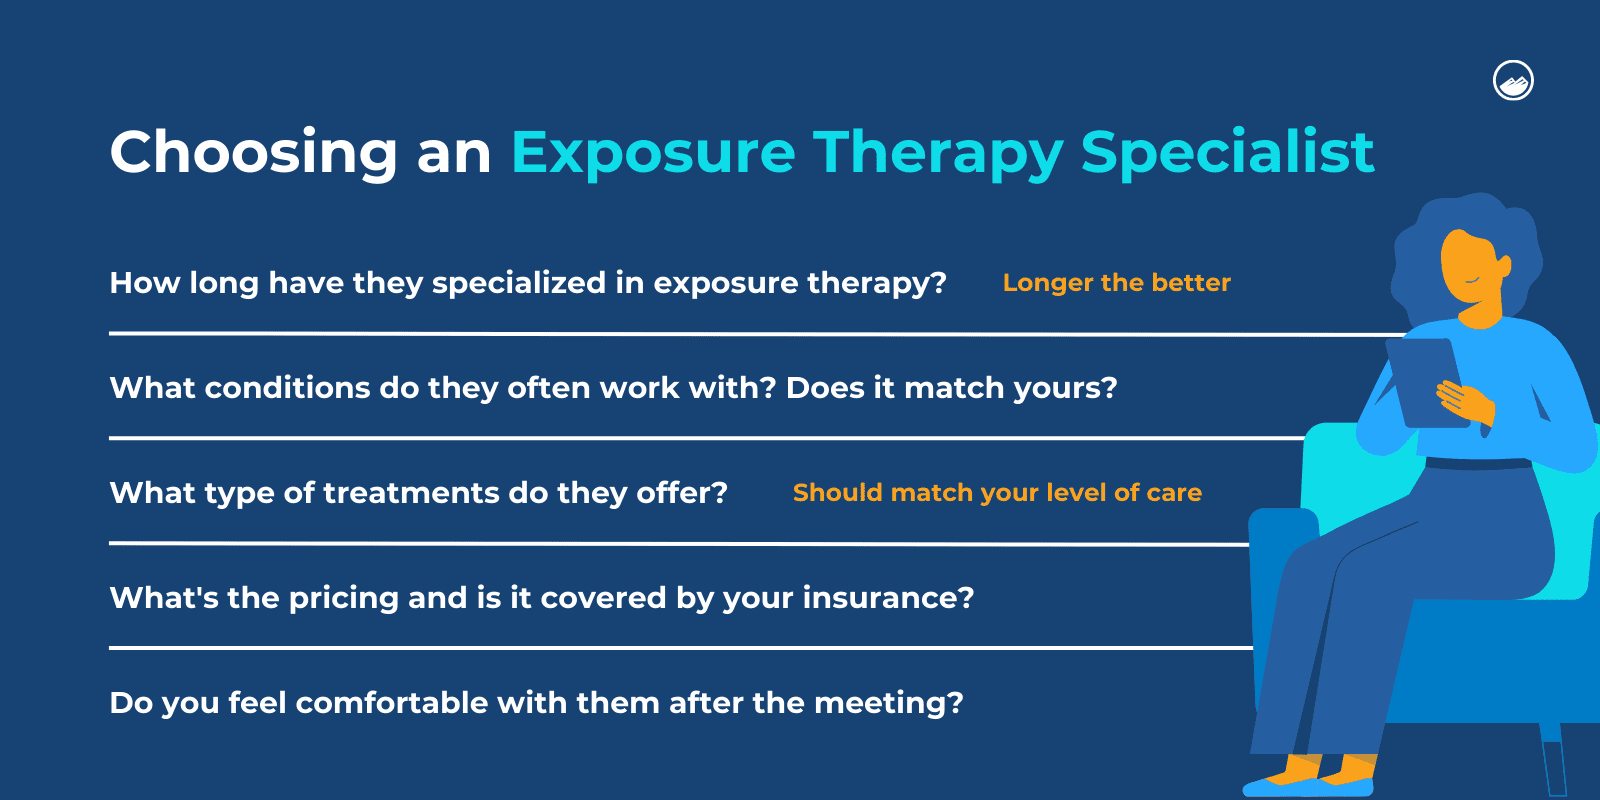 "Choosing an Exposure Therapy Specialist" written above a list of questions and an illustration of a therapist